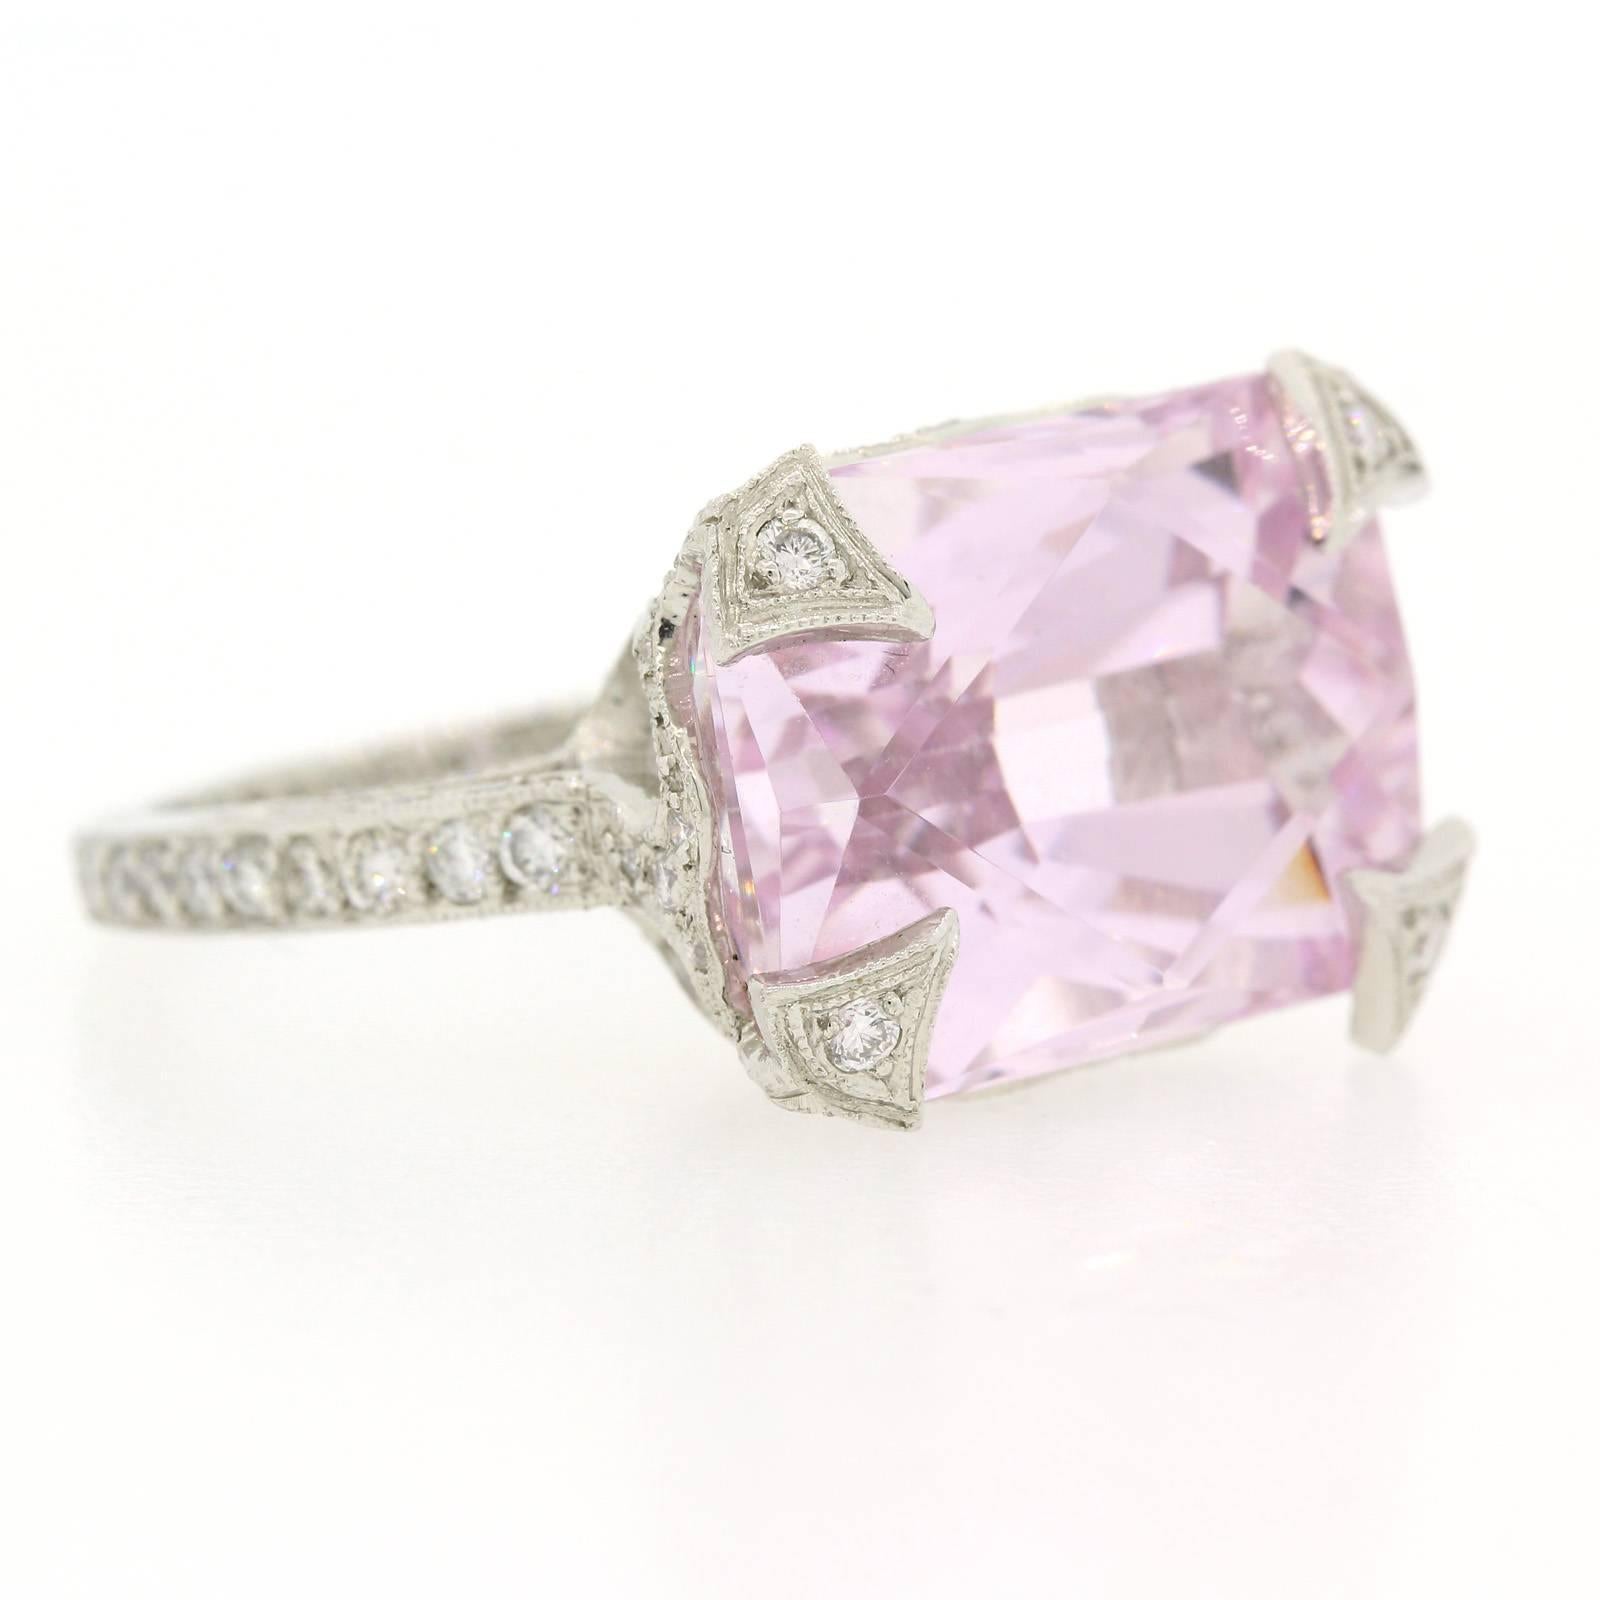 Cathy Waterman Rectangular Cut Kunzite  set in an elaborate open work platinum setting.  The ring is accented with numerous Round Brilliant Cut Diamonds and enhanced with delicate engraving and milgrain.   It is an impressive ring!